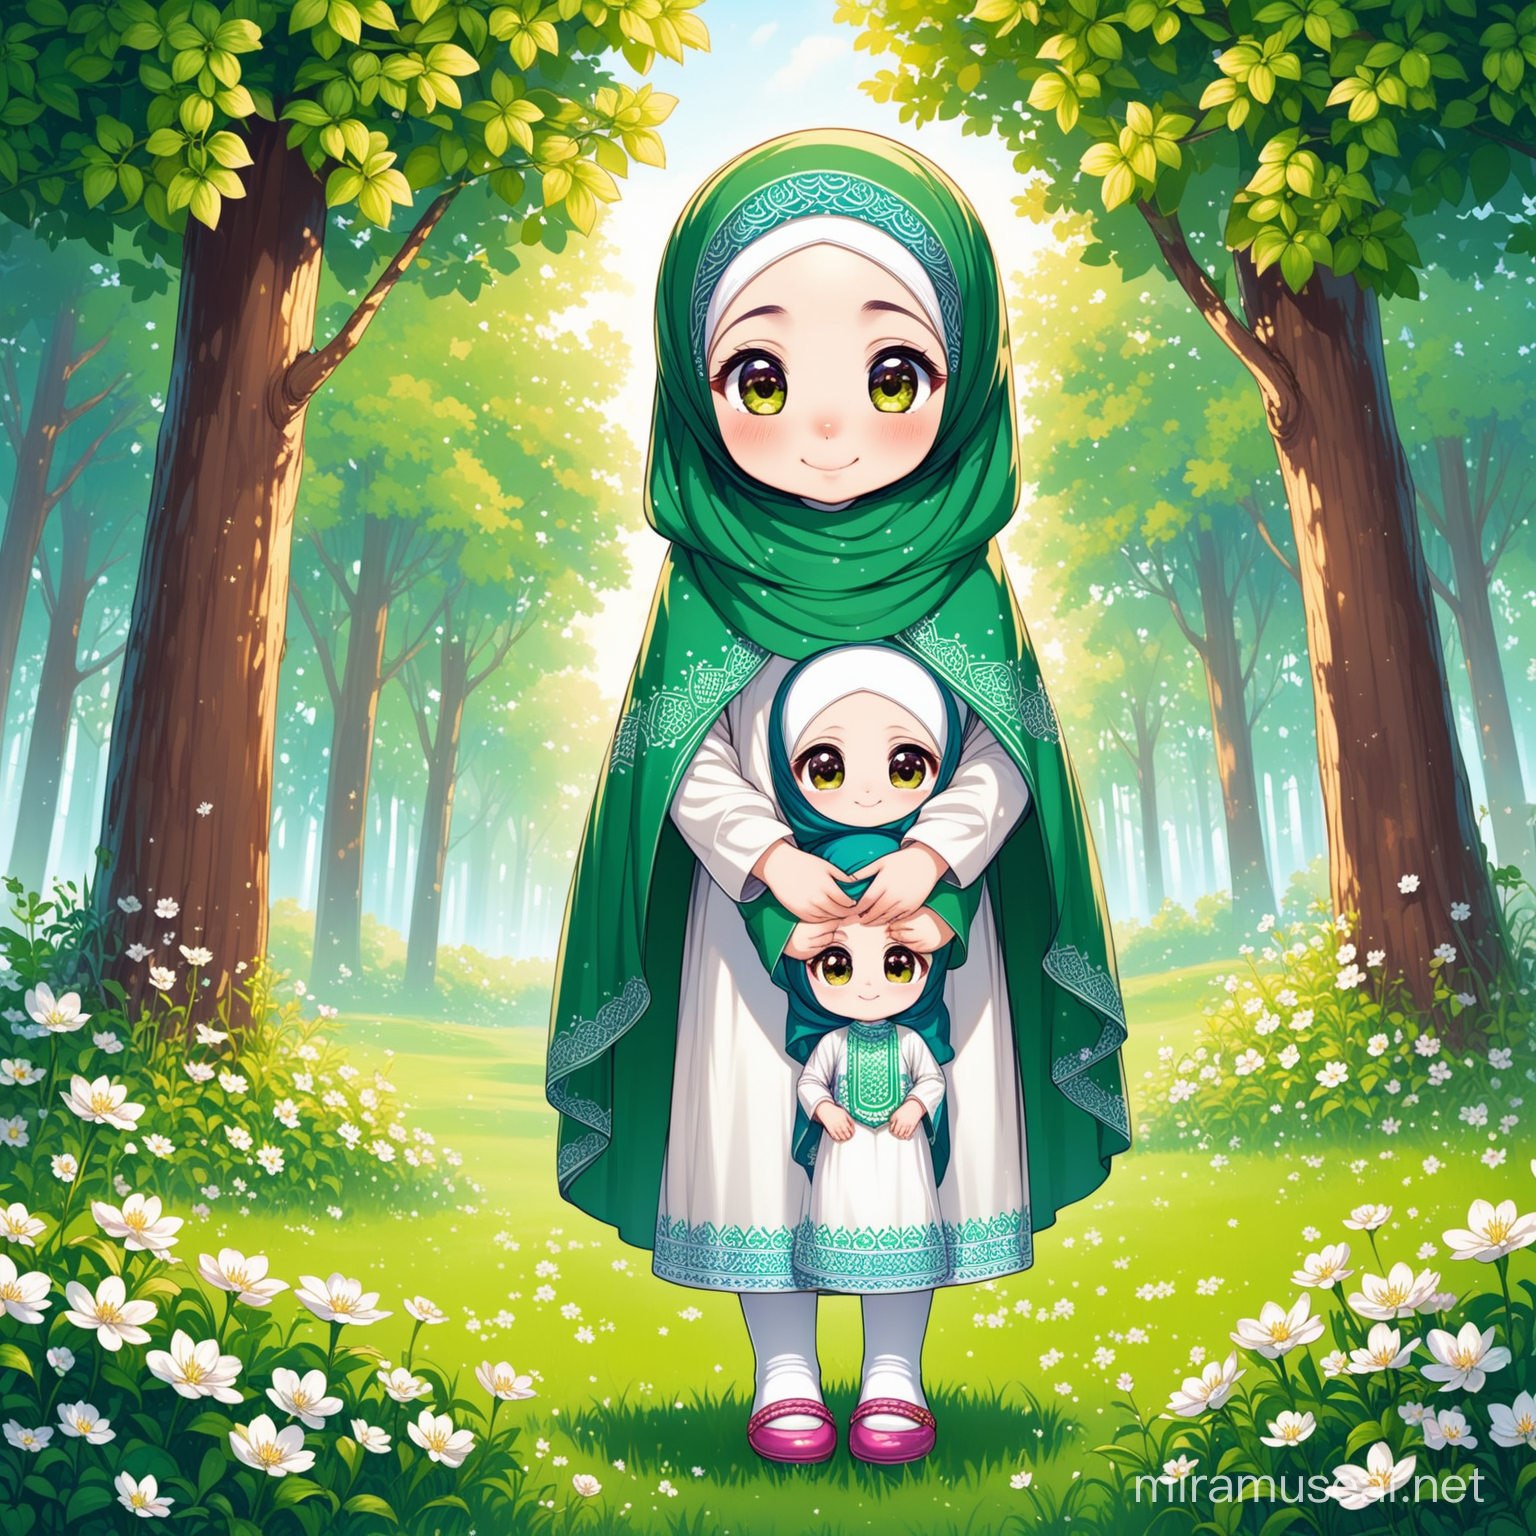 Character Persian little girl(full height, Muslim, with emphasis no hair out of veil(Hijab), smaller eyes, bigger nose, white skin, cute, smiling, wearing socks, clothes full of Persian designs) regarding father politely.

Atmosphere forest, grass flowers